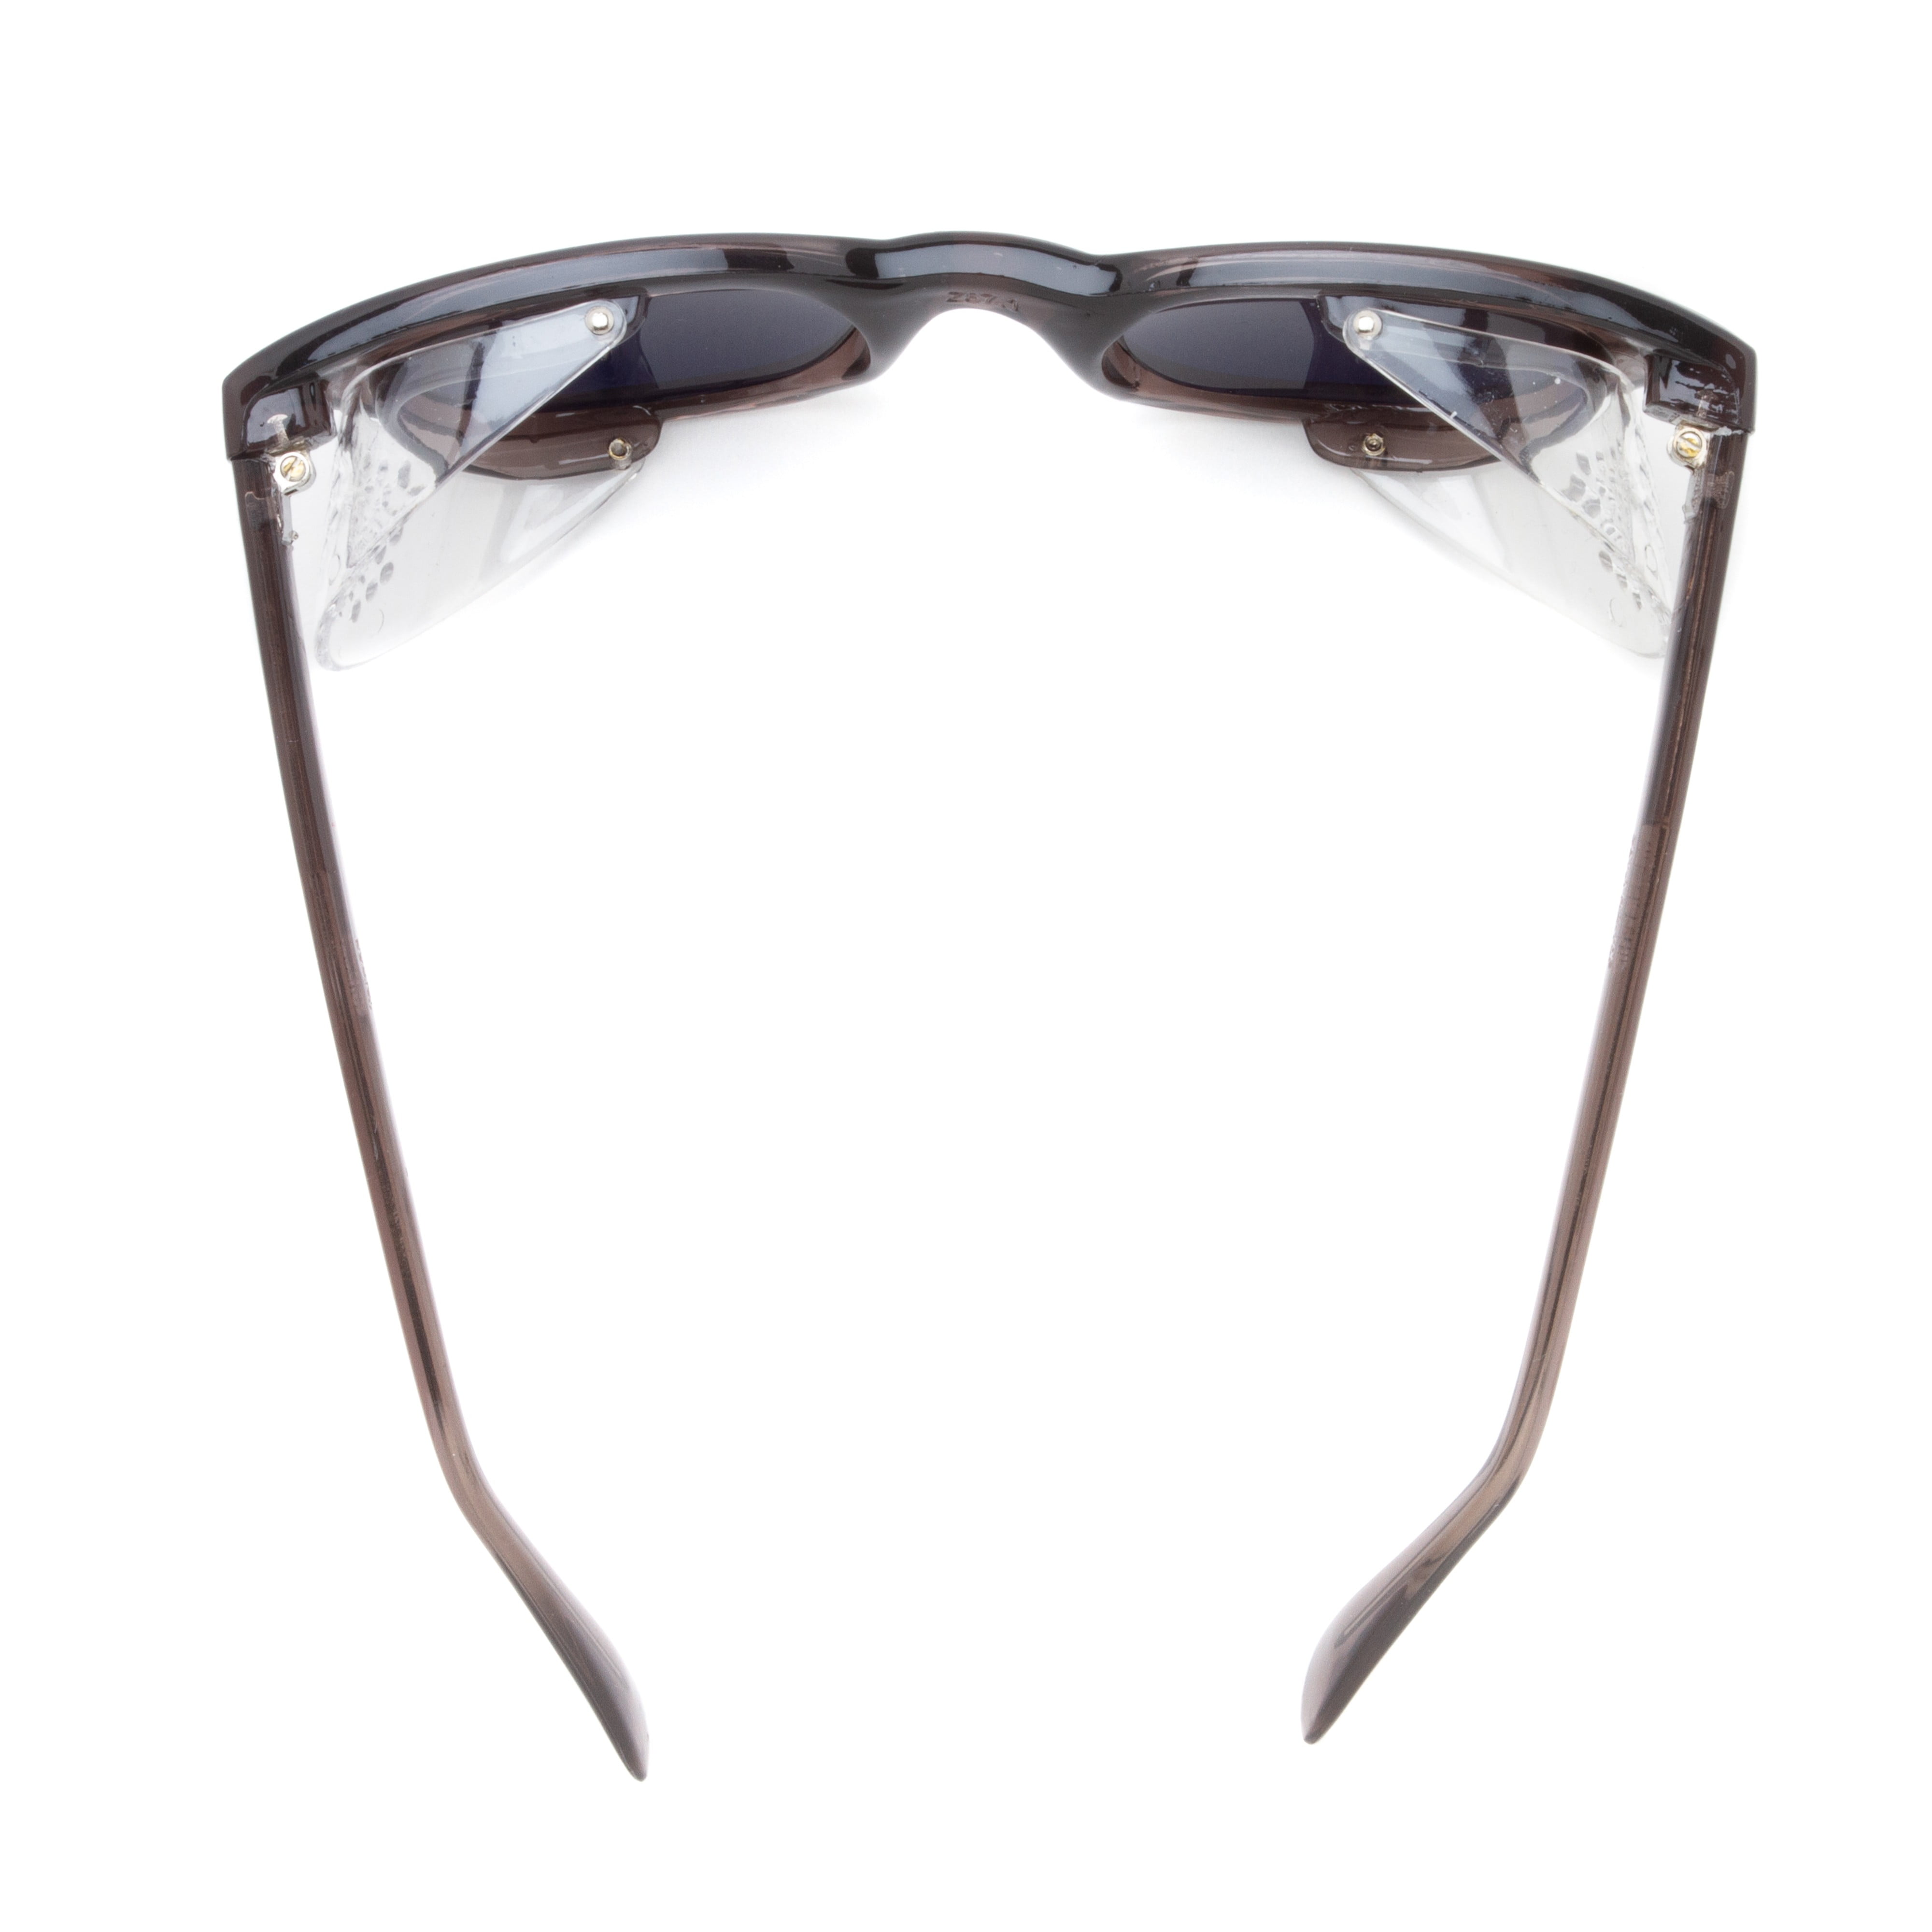 BoroTruView Shade #5 Glassworking Safety Glasses 45-25-140 Plastic Frame with 